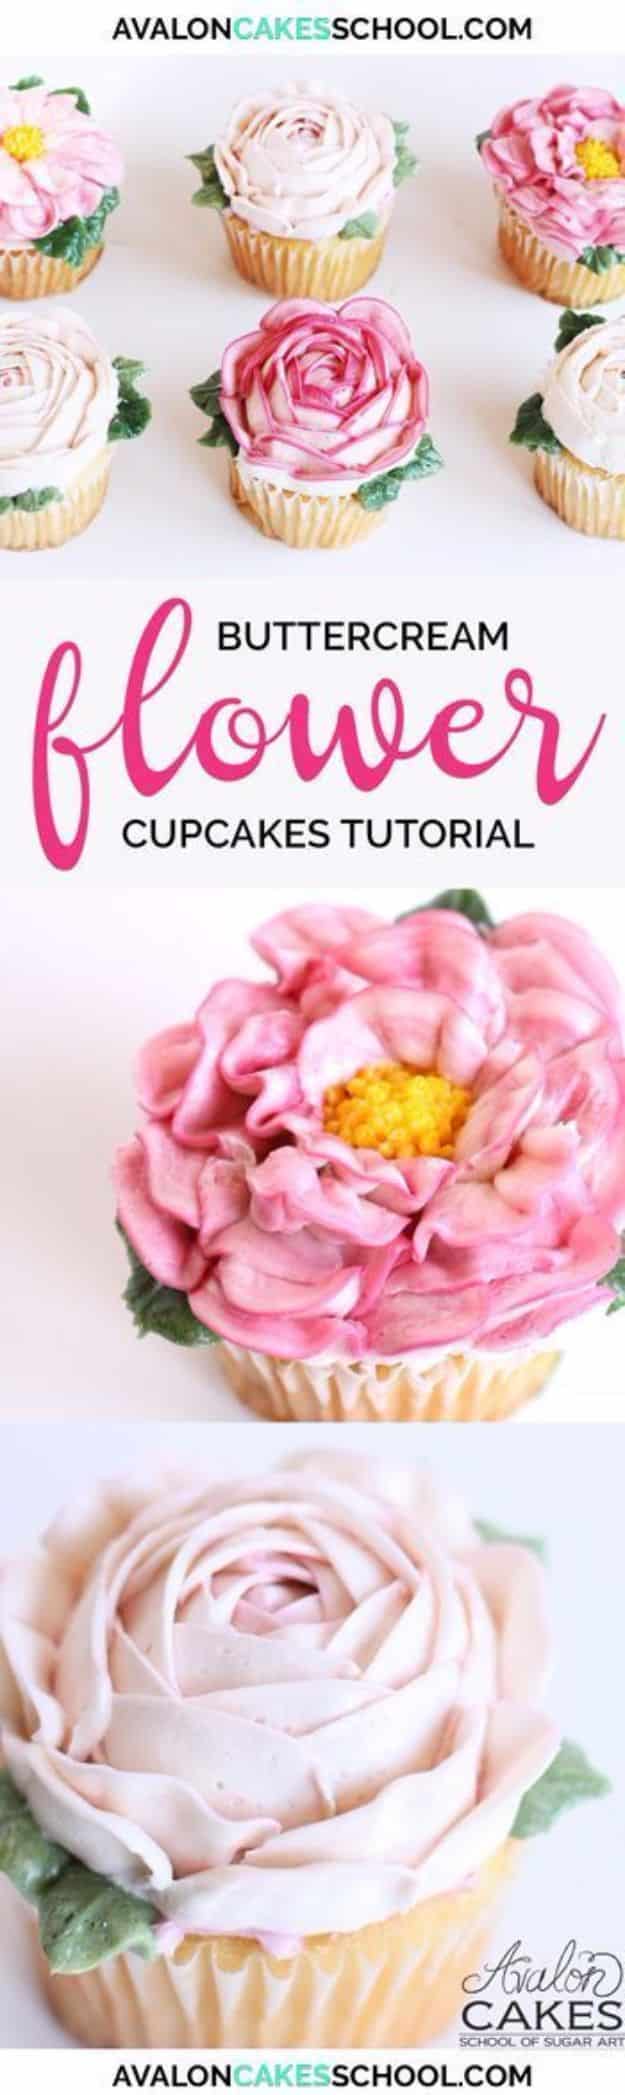 Cool Cupcake Decorating Ideas - Buttercream Flower Cupcakes - Easy Ways To Decorate Cute, Adorable Cupcakes - Quick Recipes and Simple Decorating Tips With Icing, Candy, Chocolate, Buttercream Frosting and Fruit kids birthday party ideas cake